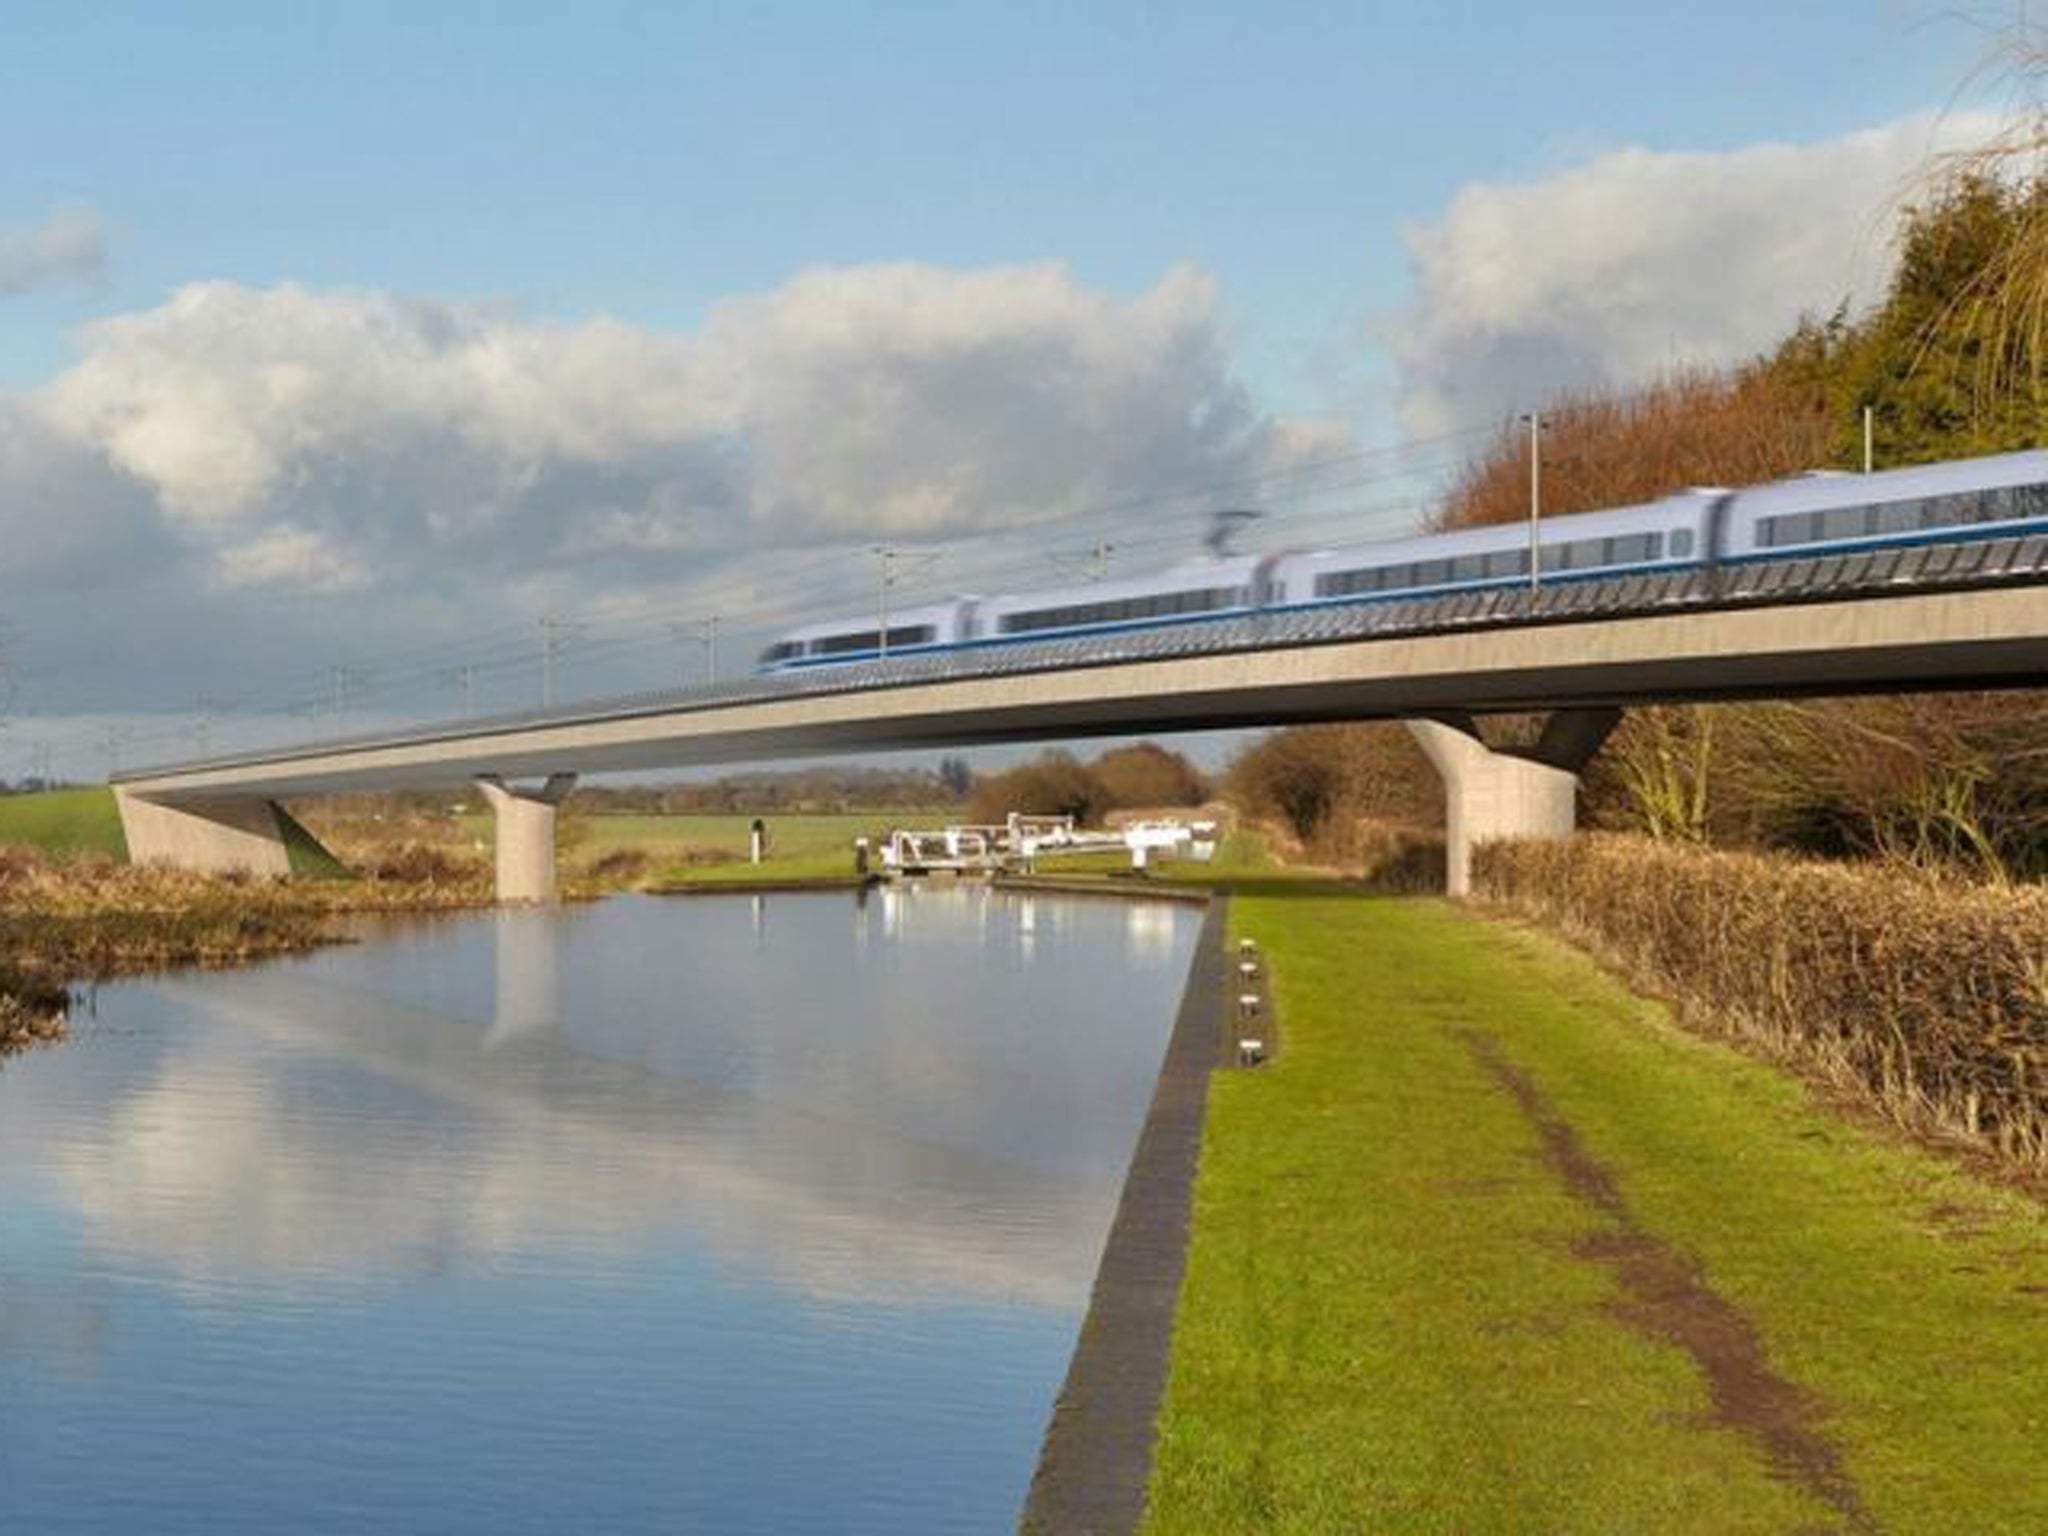 The current cost of the HS2 project is estimated at £42.6 billion